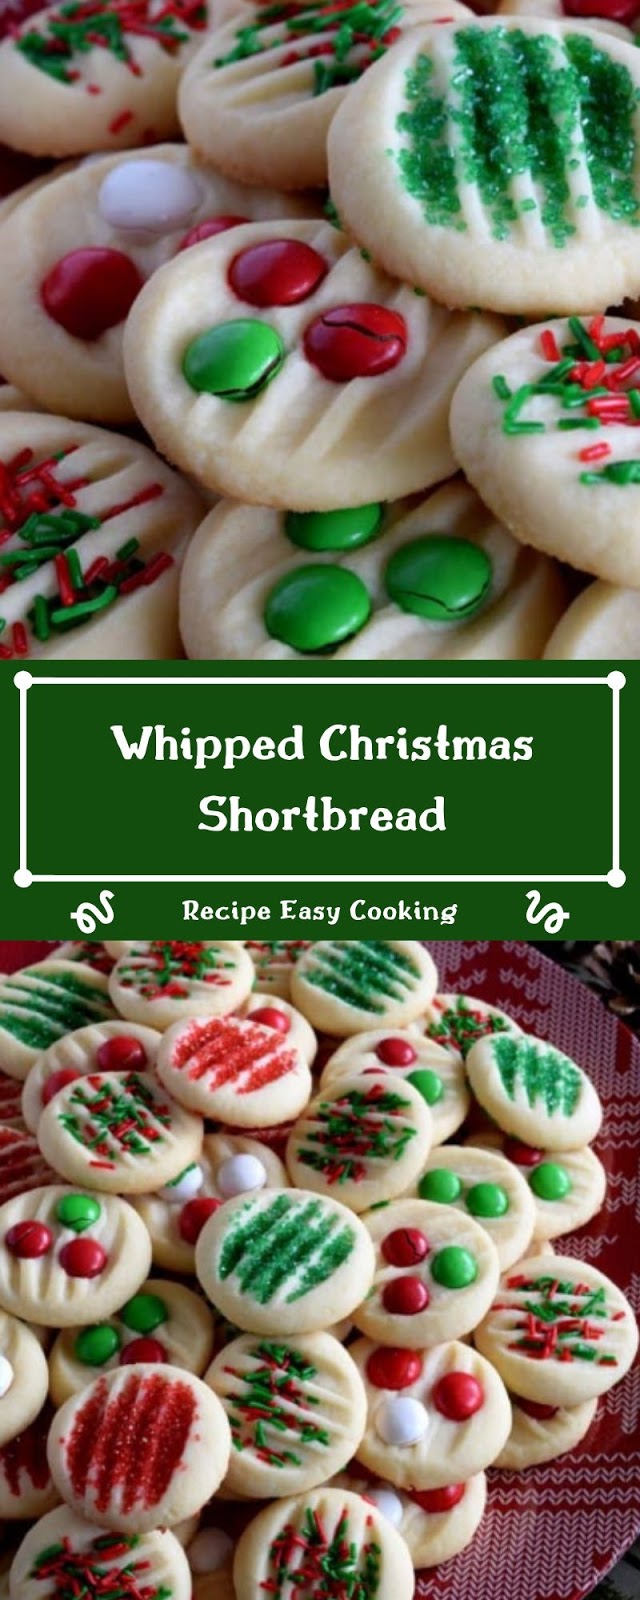 Whipped Christmas Shortbread